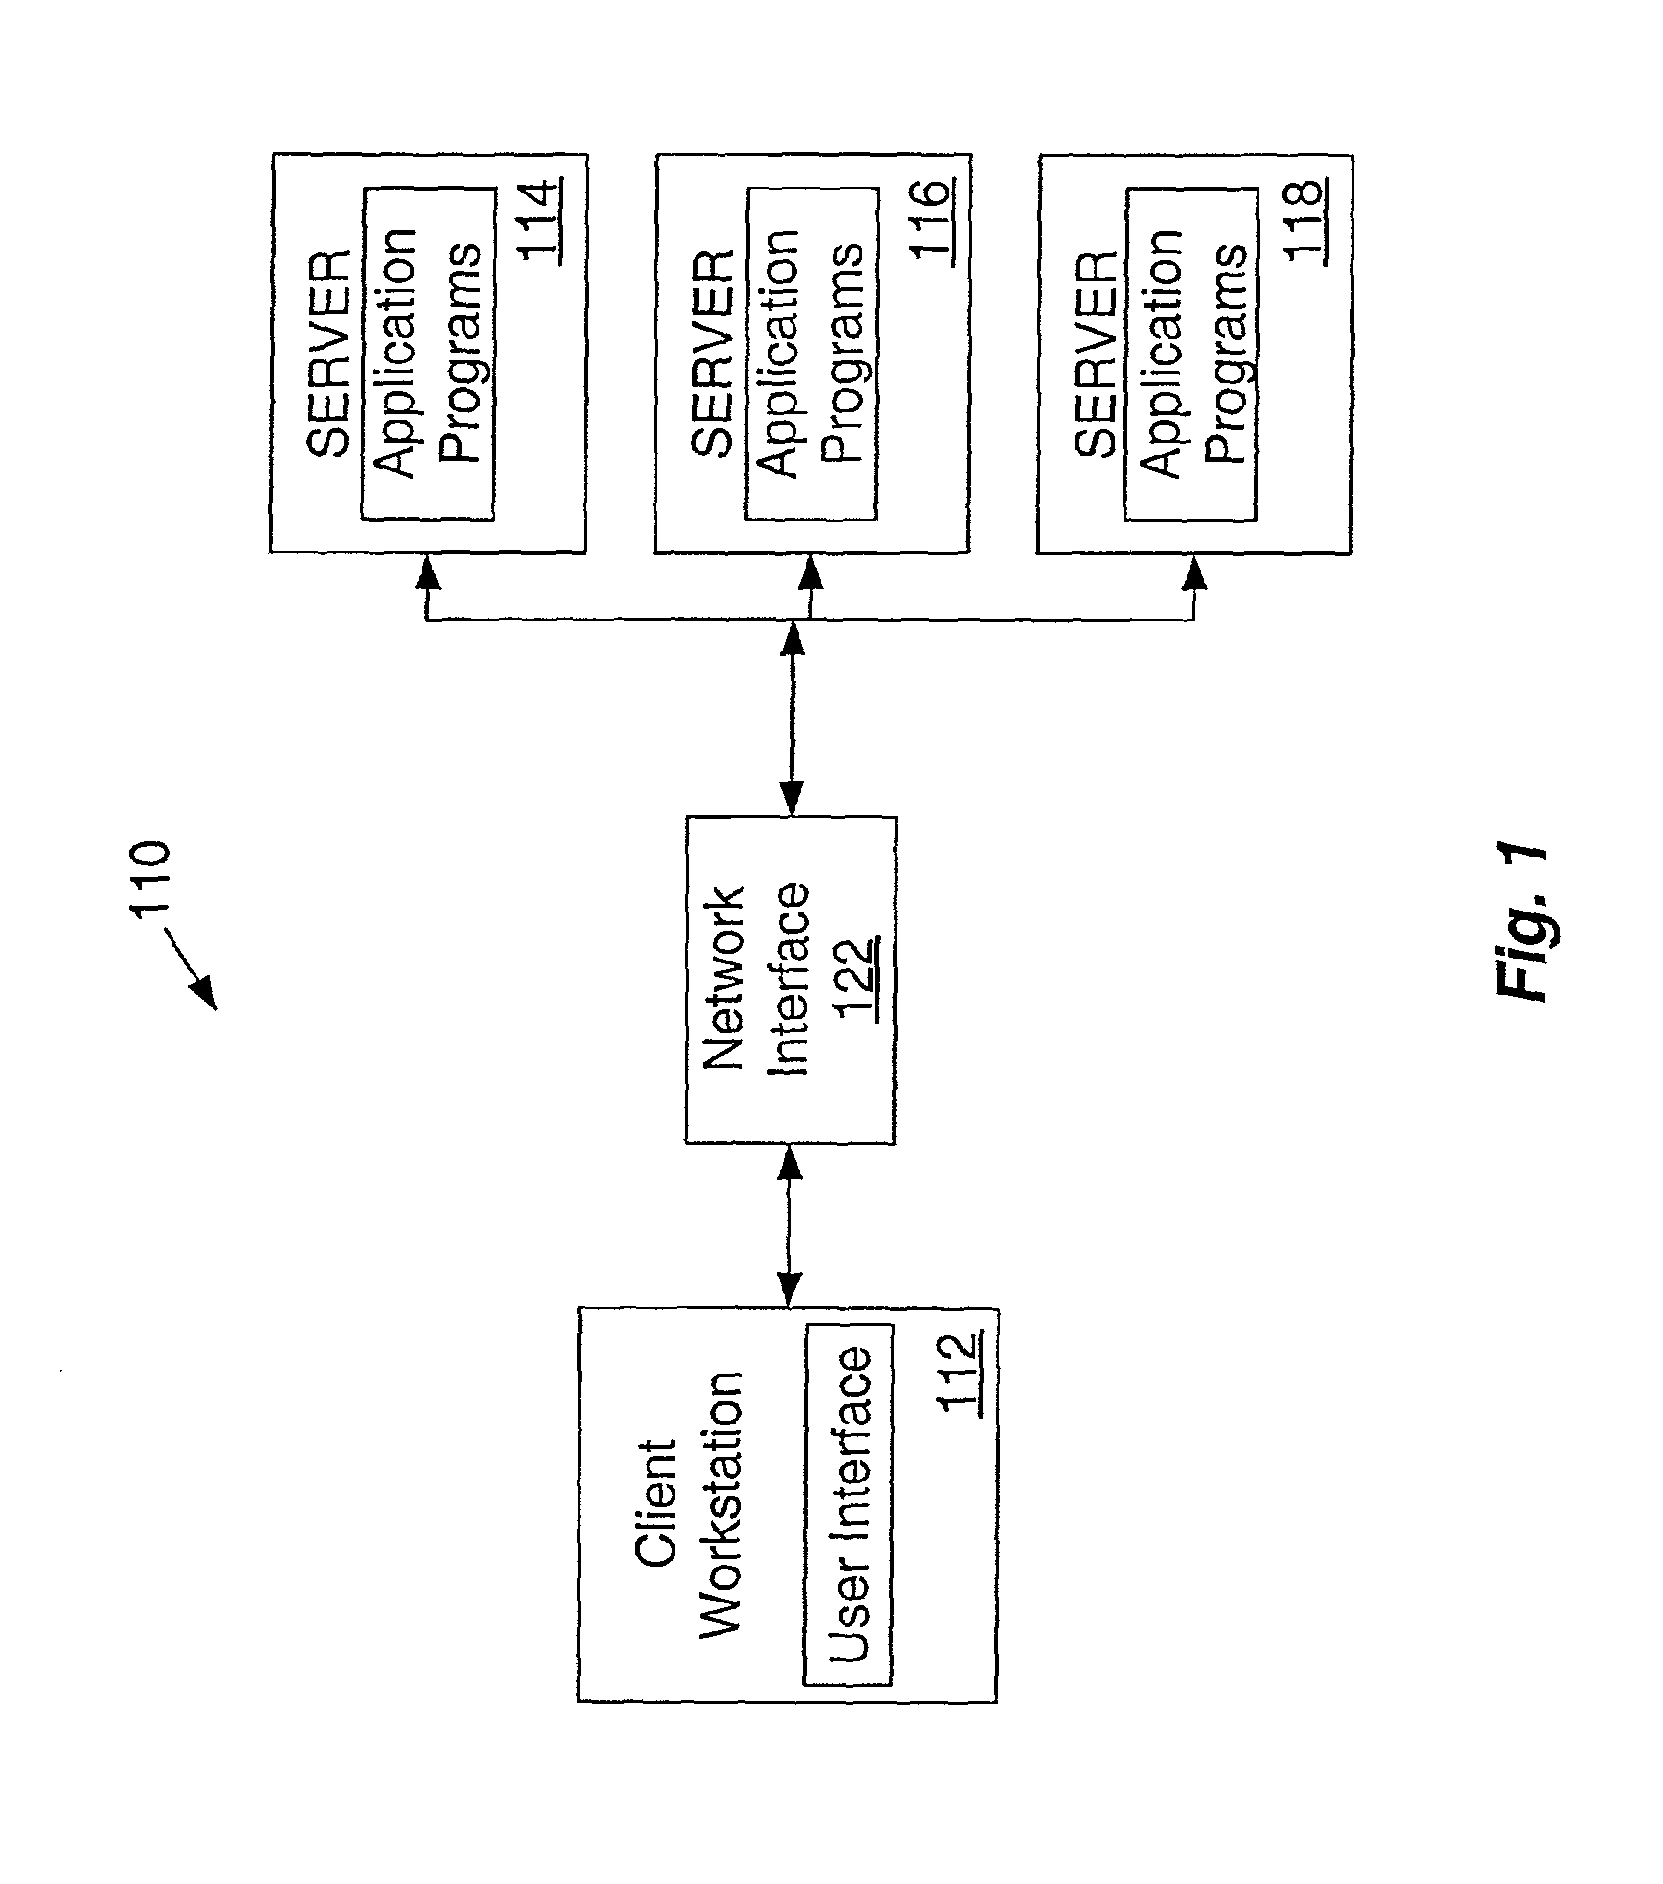 System and method for remotely debugging application programs